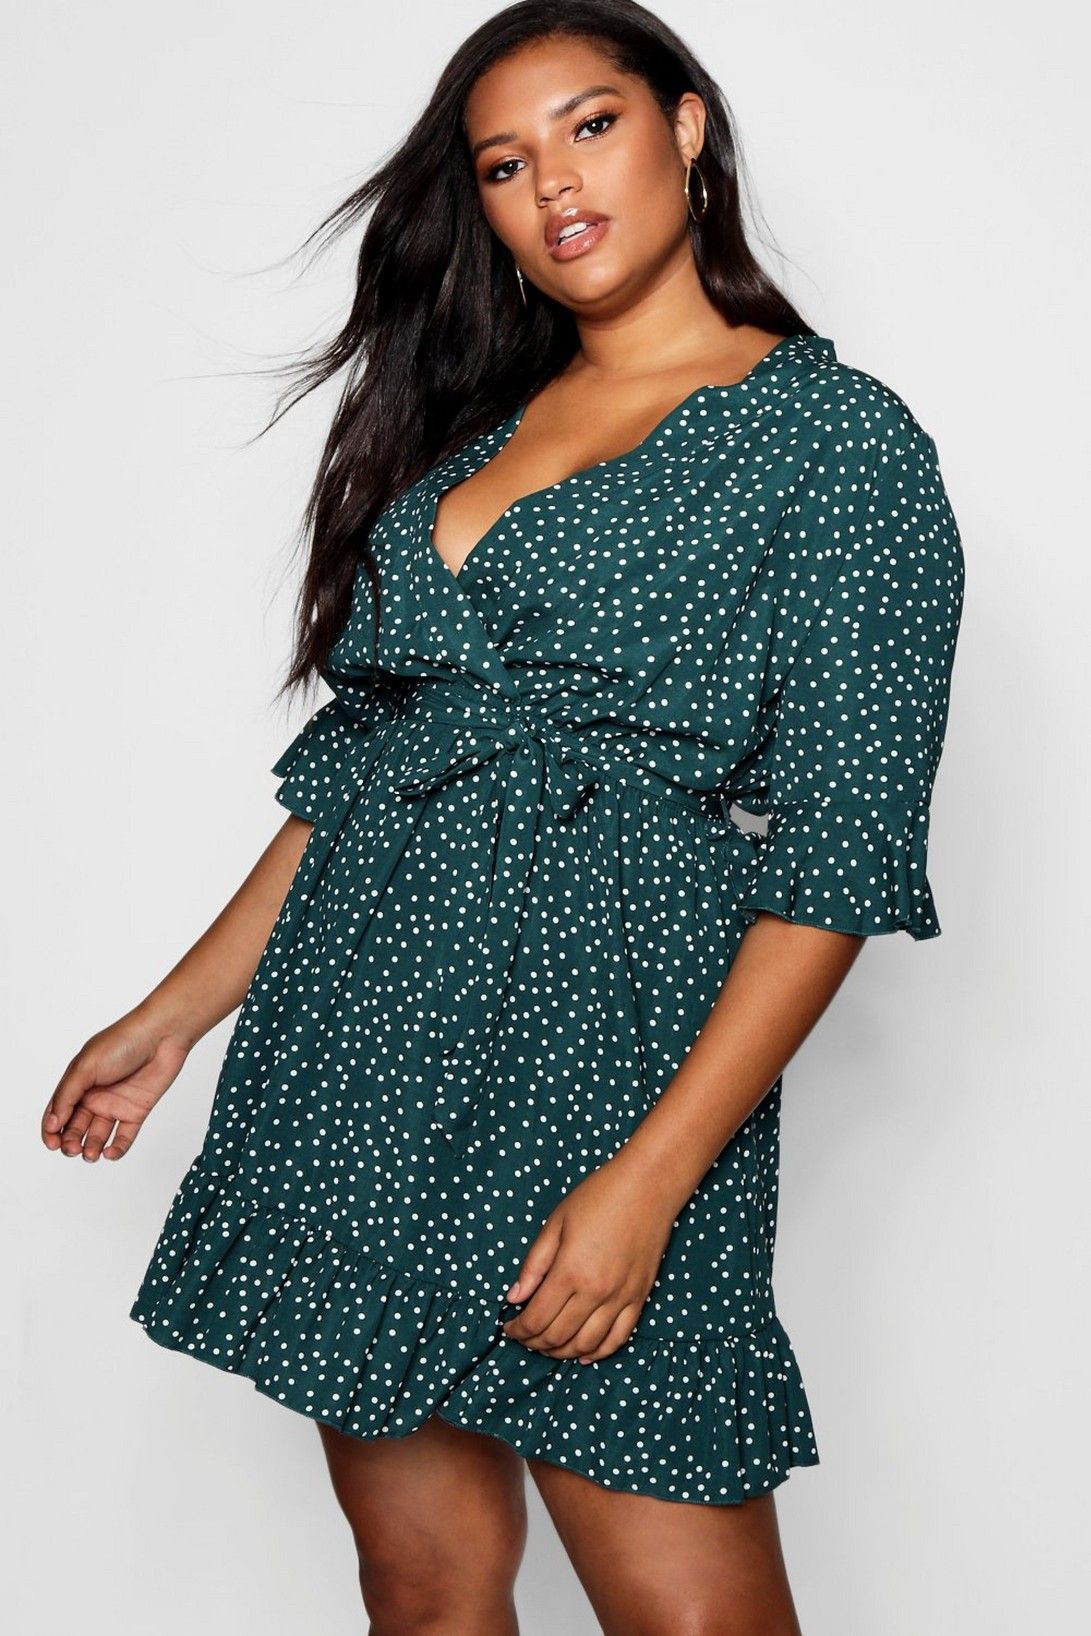 Trendy clothing ideas with wrap dress, polka dot, day dress, top | Plus  Size Date Outfit Ideas | Date Outfits, day dress, fashion model